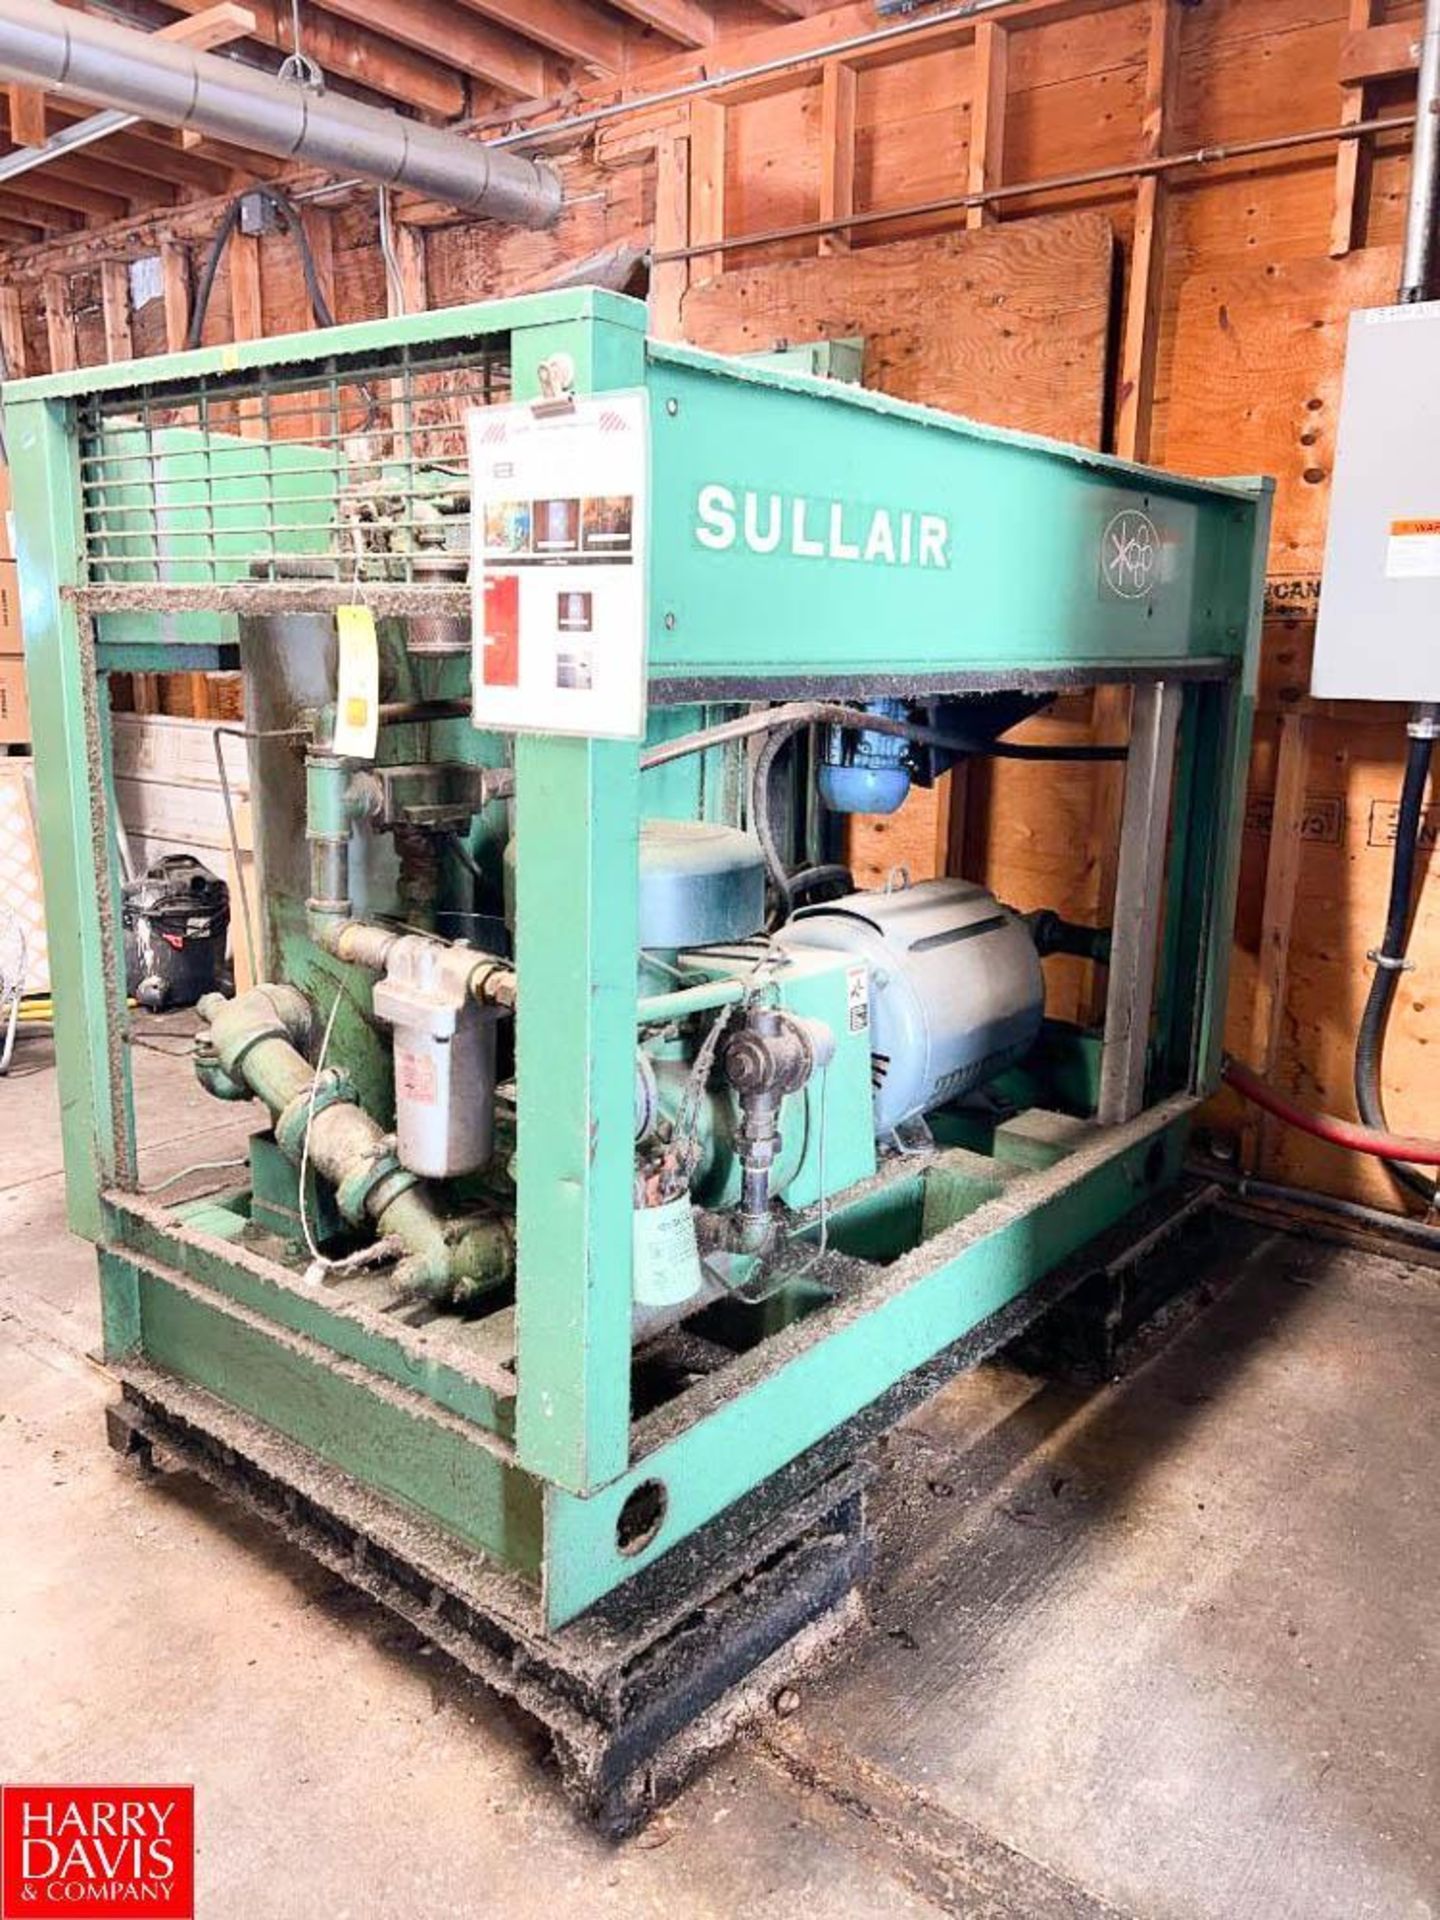 Sullair 50 HP, 125 PSIG Air Compressor, Model: 12B-50H, S/N: 003-57148 with Controls